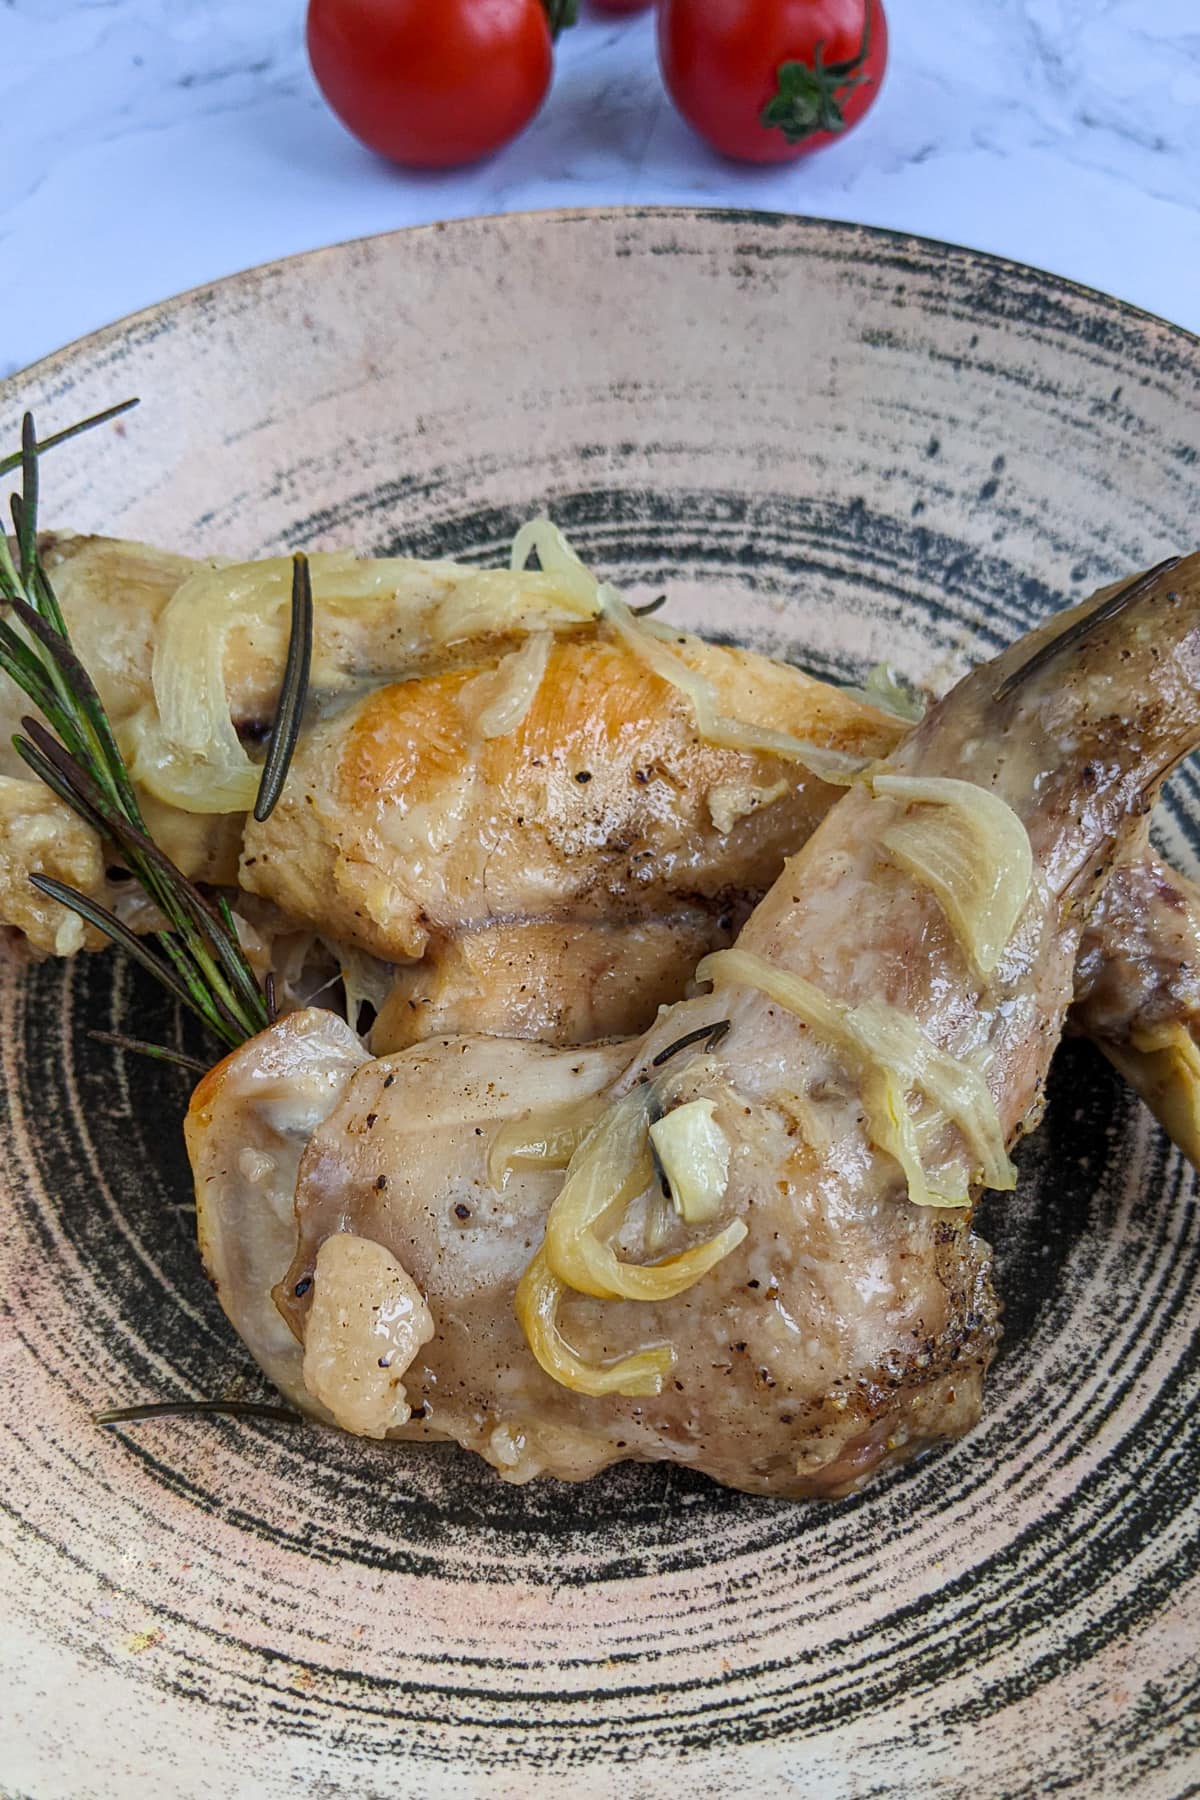 Close look of juicy rabbit meat with onions and rosemary.